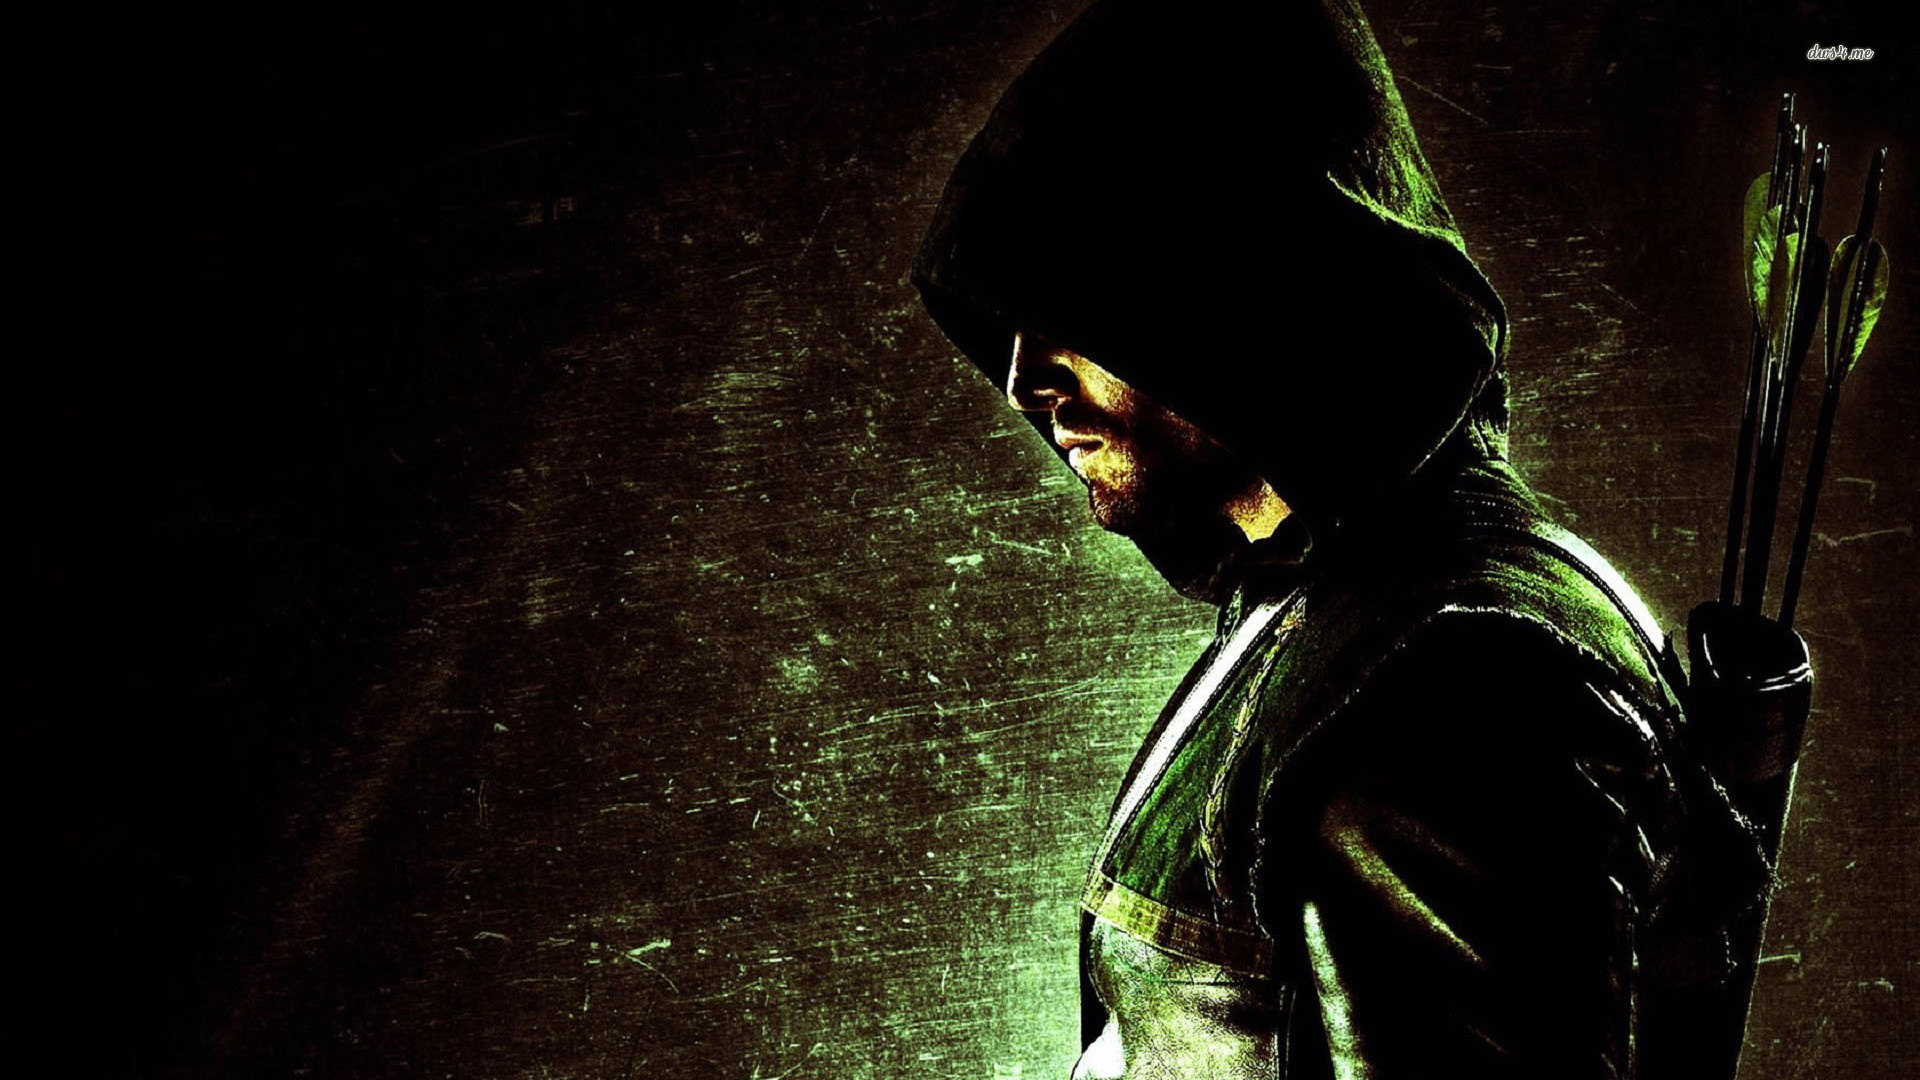 1920x1080 Arrow Oliver Queen and Ted Kord by theunbrilliant on DeviantArt | HD  Wallpapers | Pinterest | Hd wallpaper, Wallpaper and deviantART